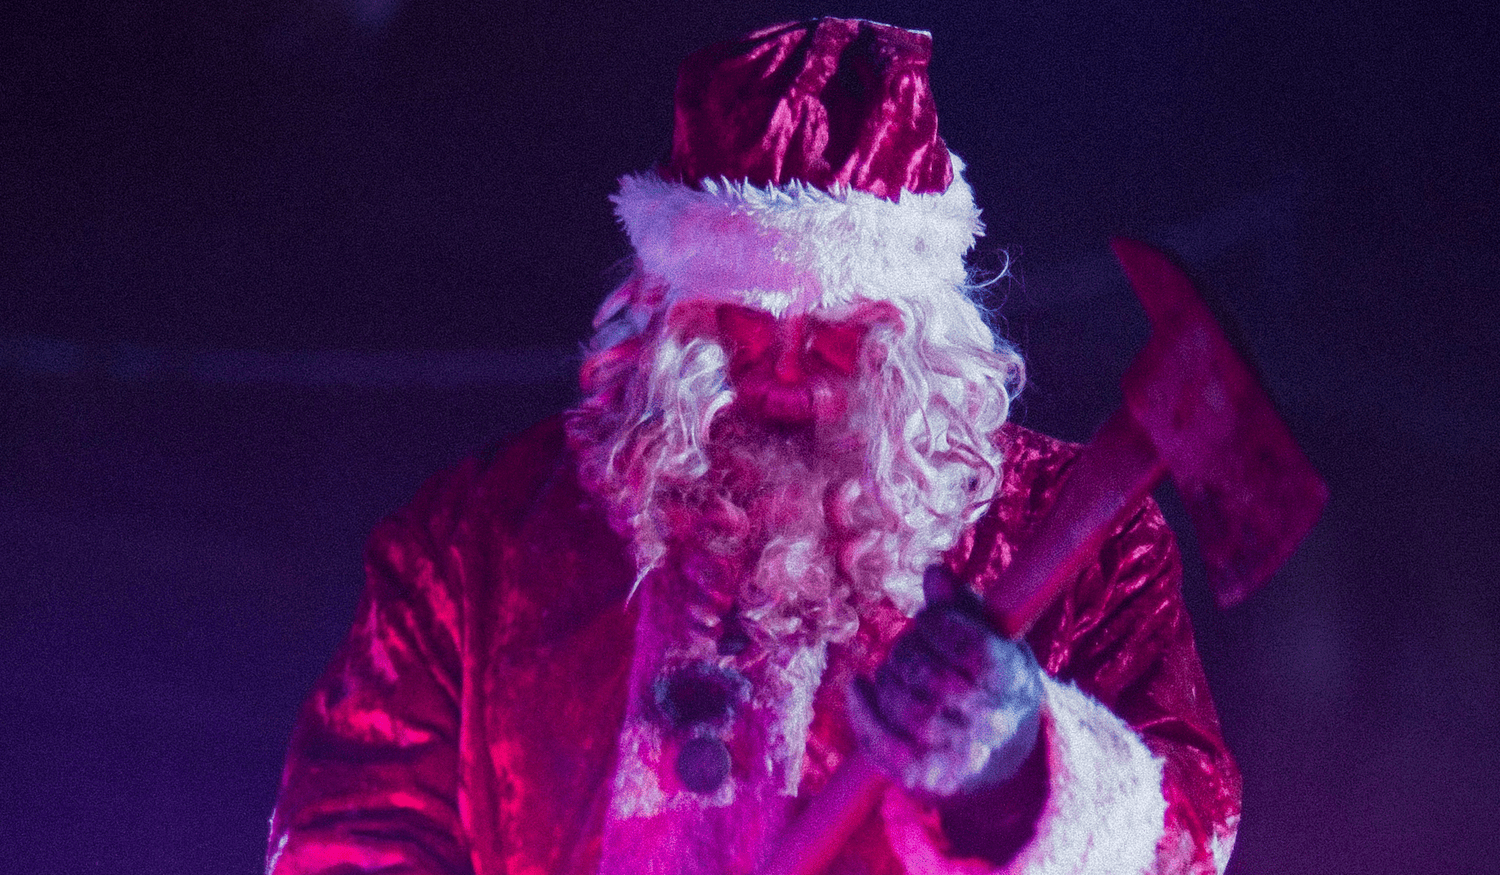 Ho-Ho-Holy Shit! "Christmas Bloody Christmas" Gives The Gift Of Laughs, Scares, Sex, and Bloody Violence